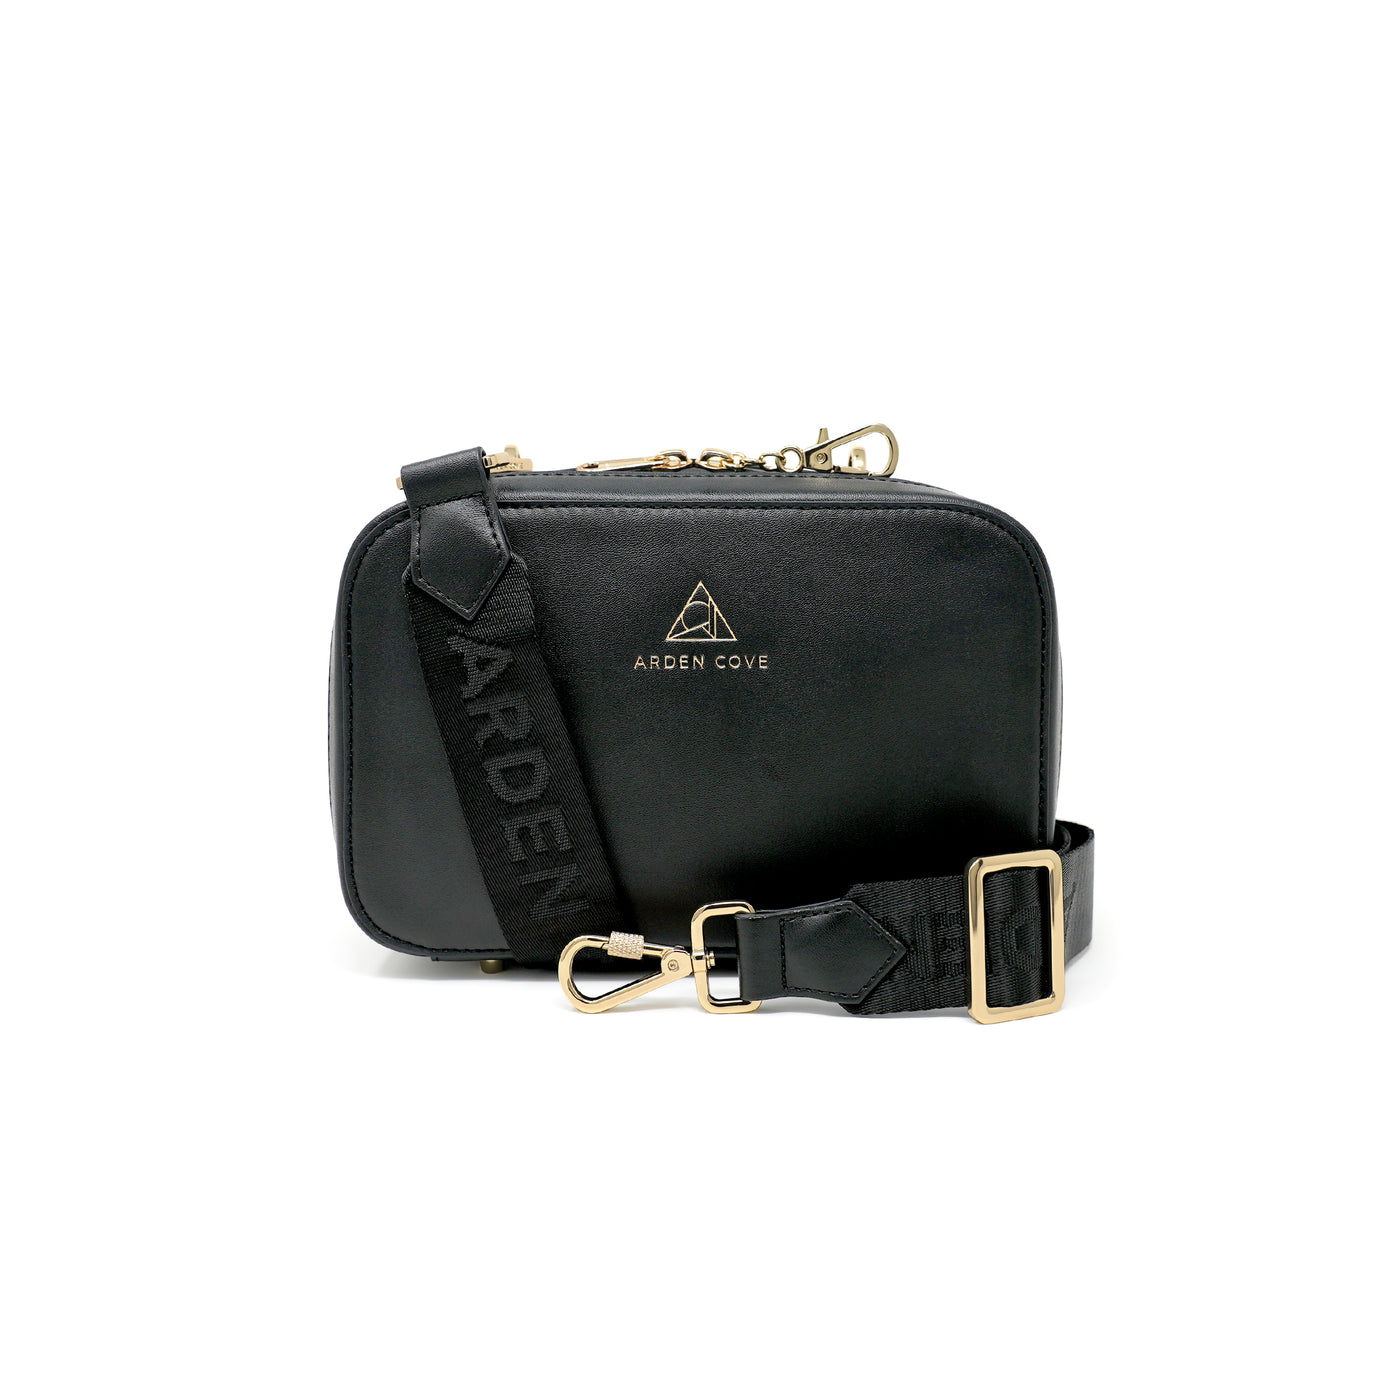 Anti-theft Water-resistant Travel Crossbody - Elise Crossbody in Black Gold with nylon jacquard & locking clasps straps - front view - Arden Cove